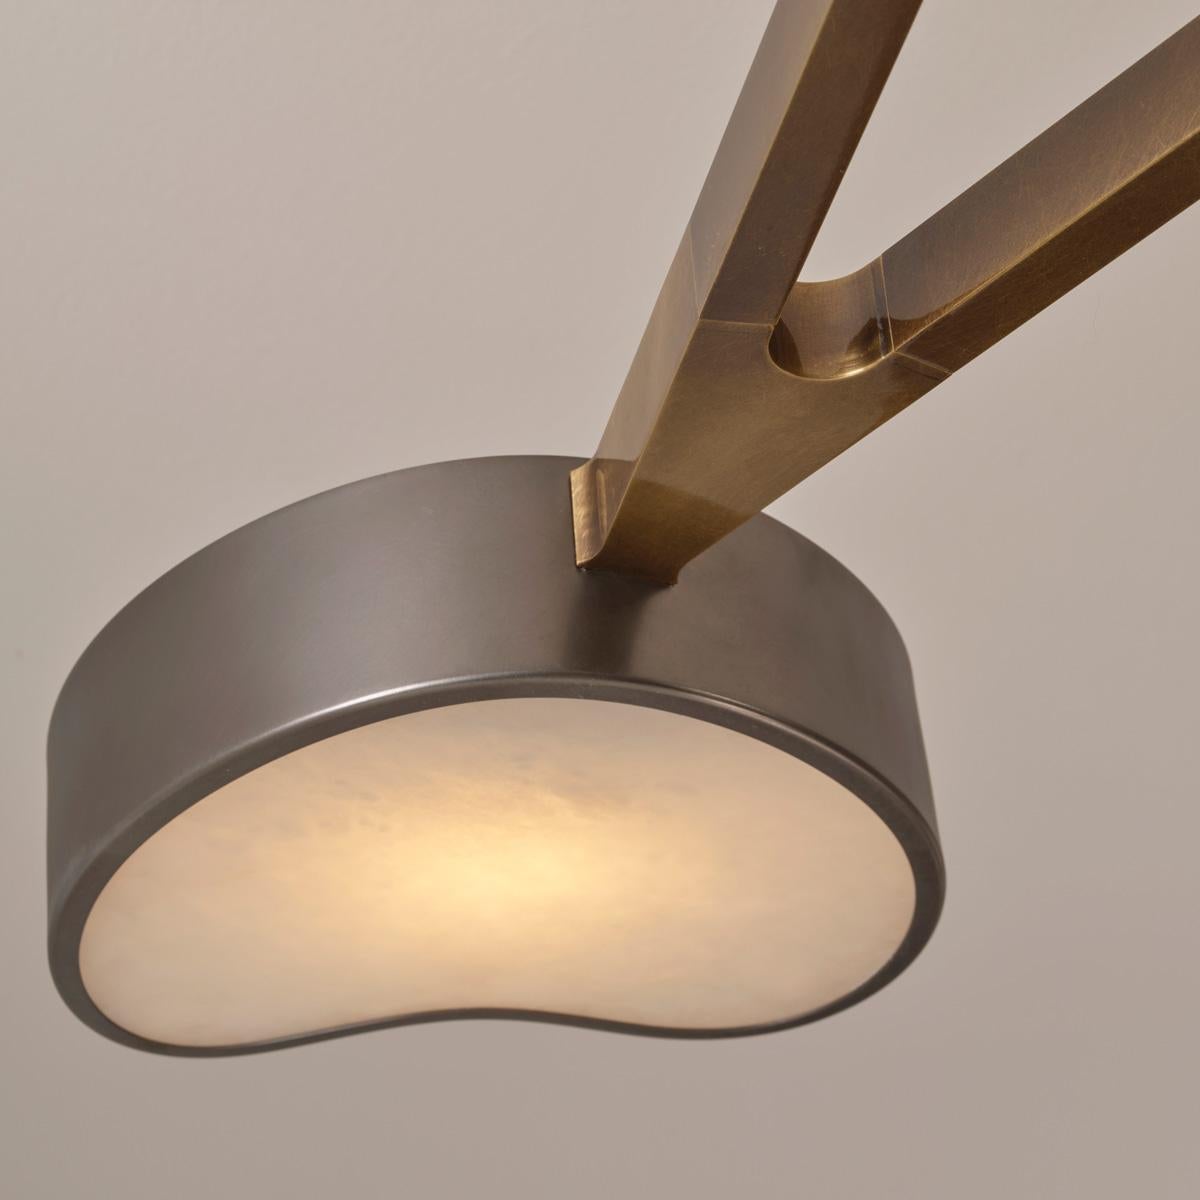 Brass Cuore N.5 Ceiling Light by Gaspare Asaro. Peltro and Bronze Finish For Sale